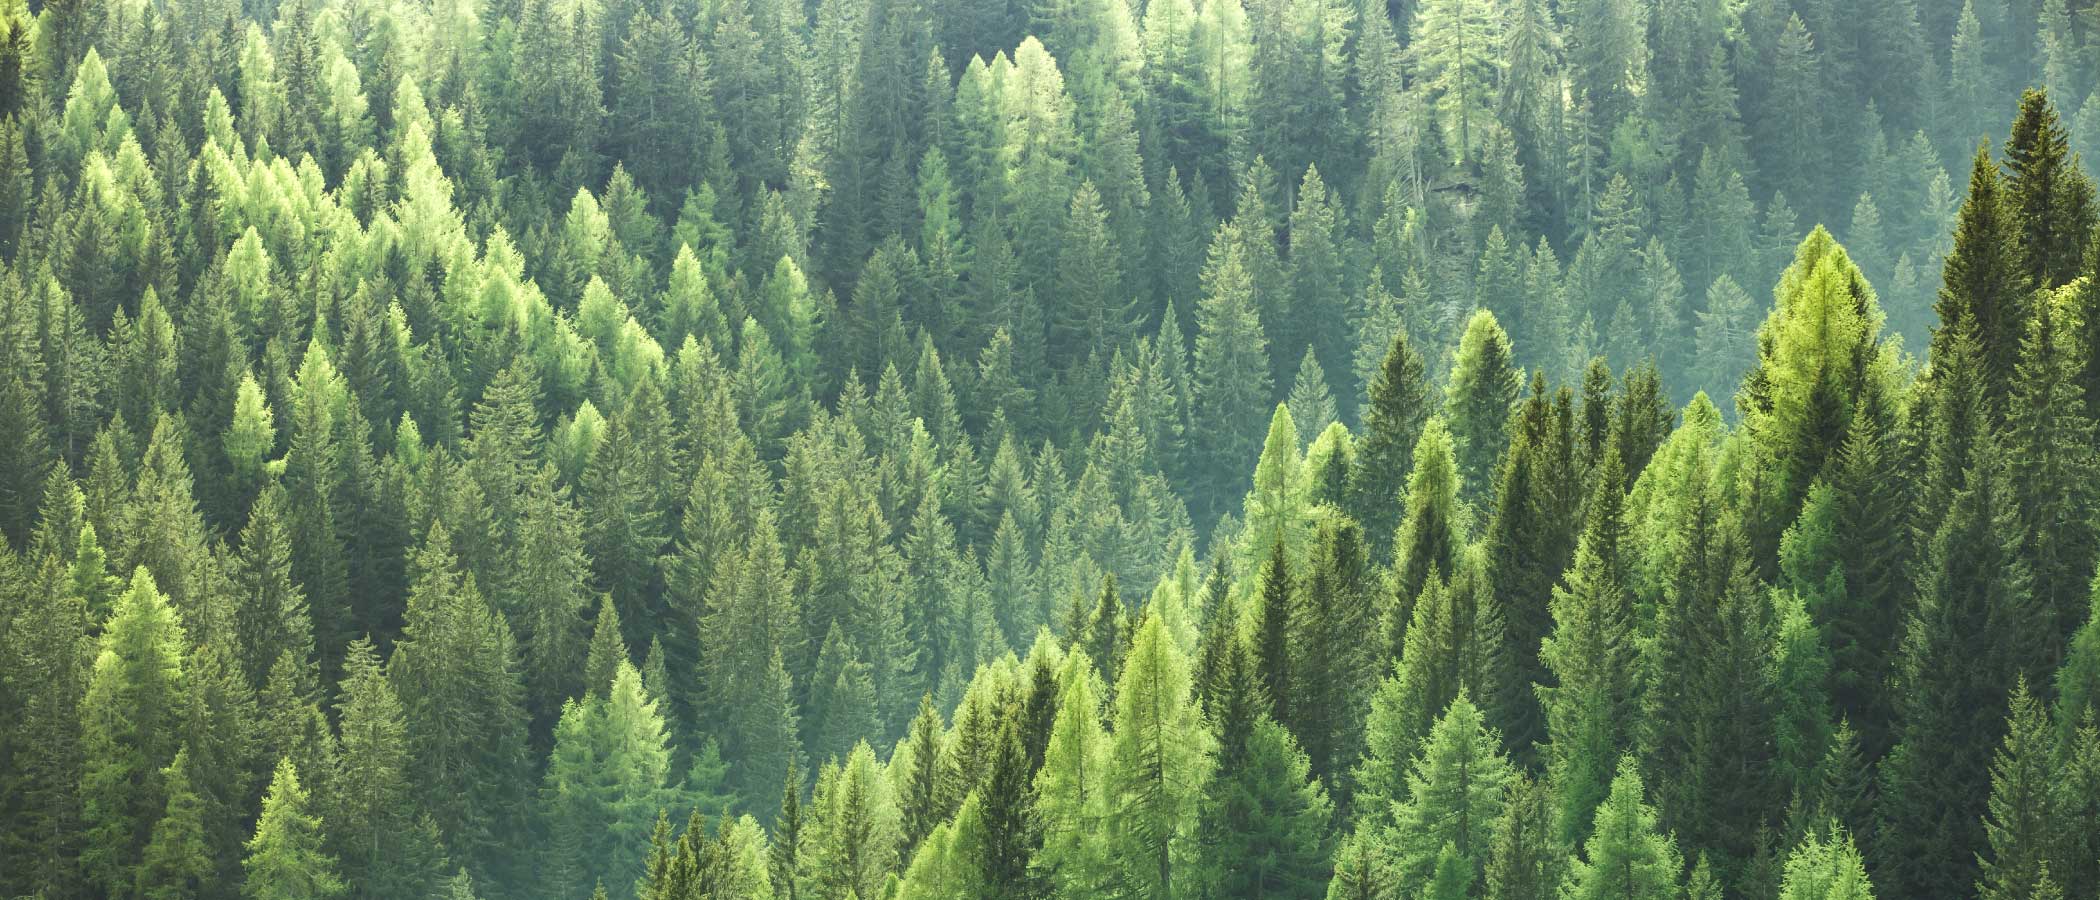 Densely packed young green pine trees covering multiple ridges of a hillside.